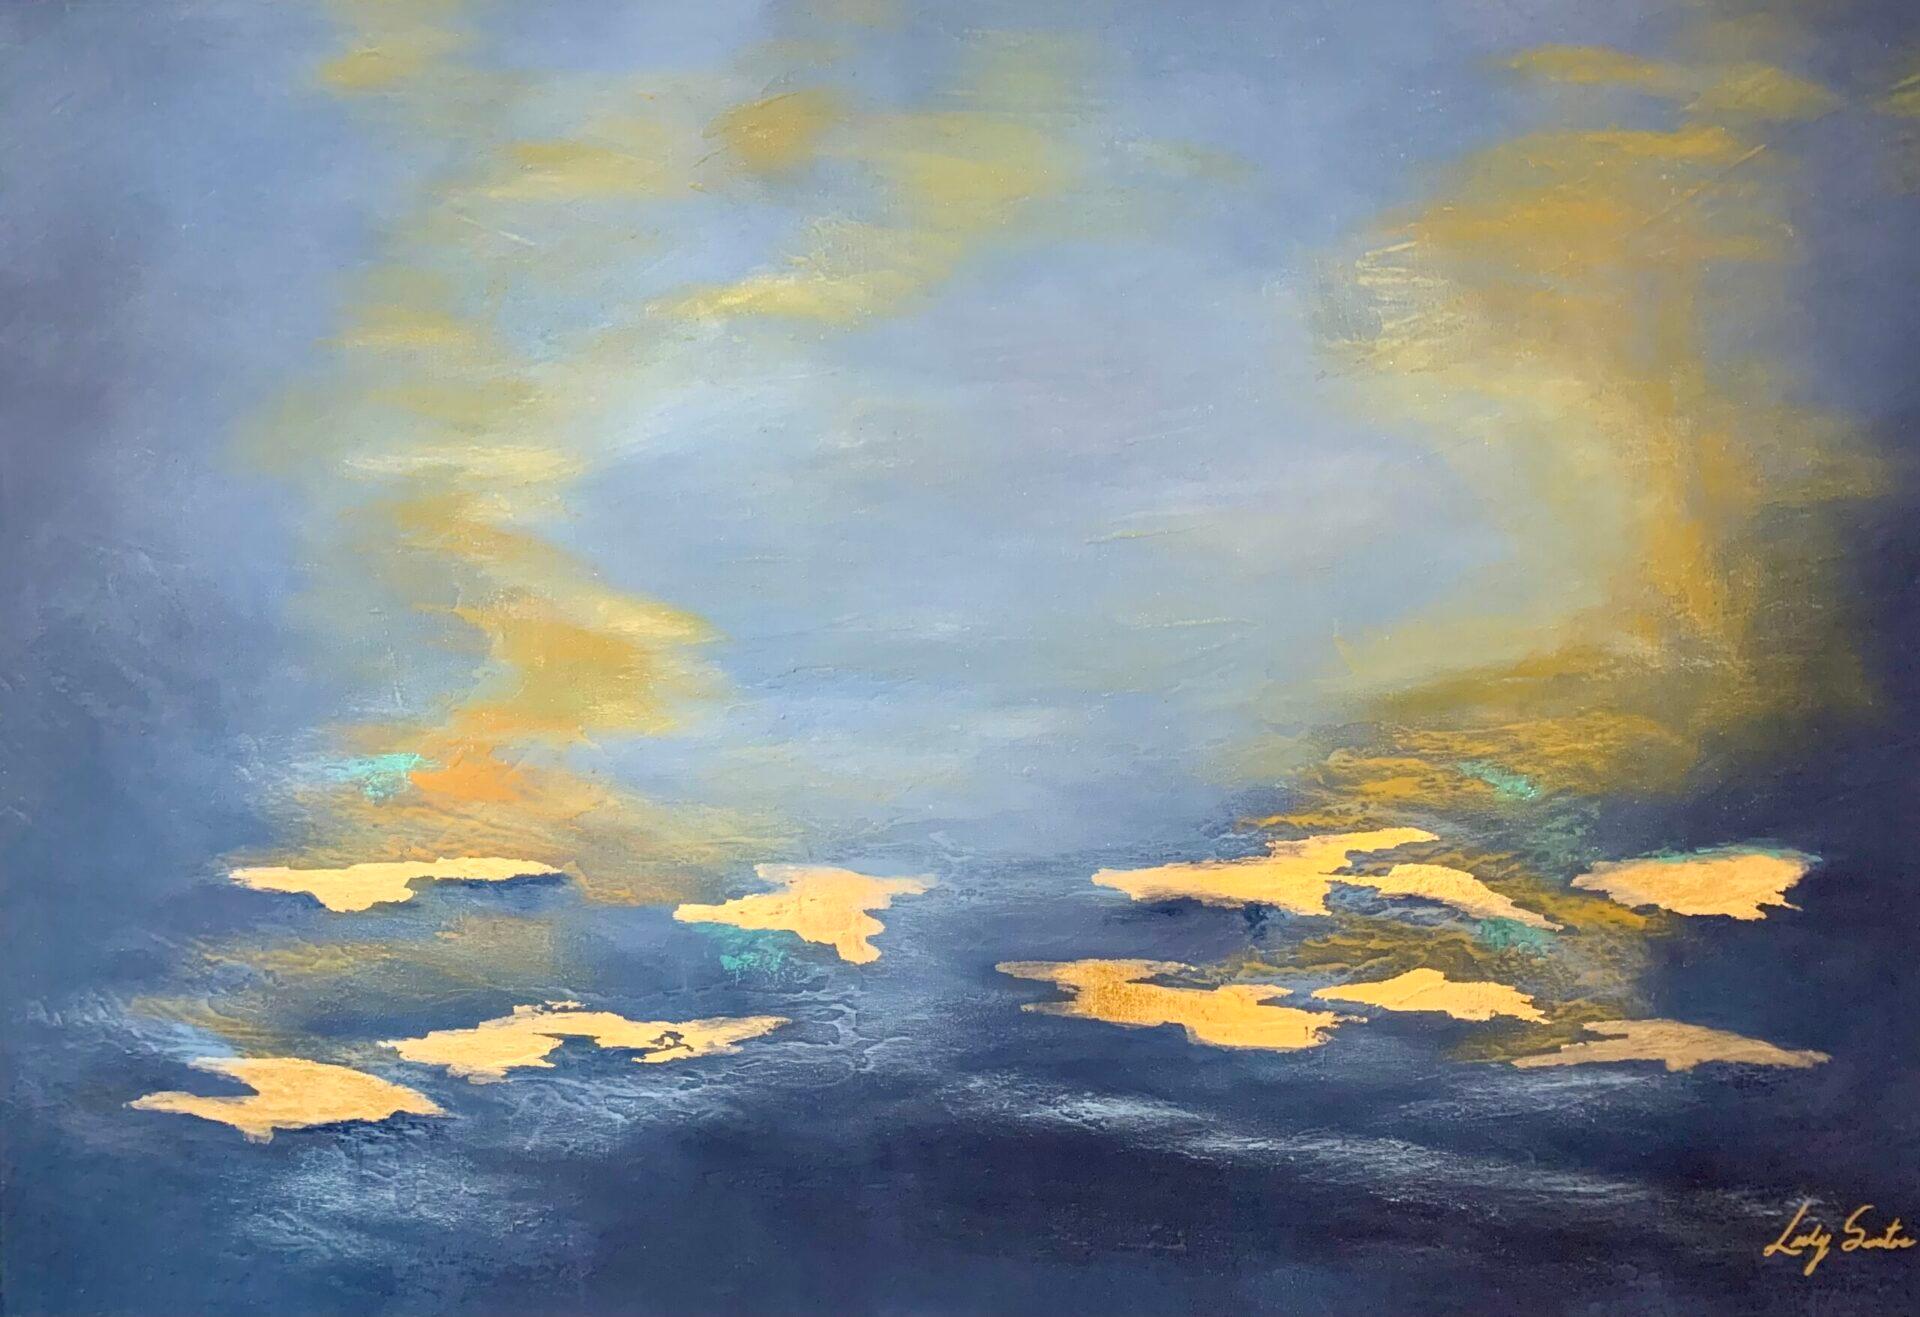 Atardecer - Painting by Luly Santos